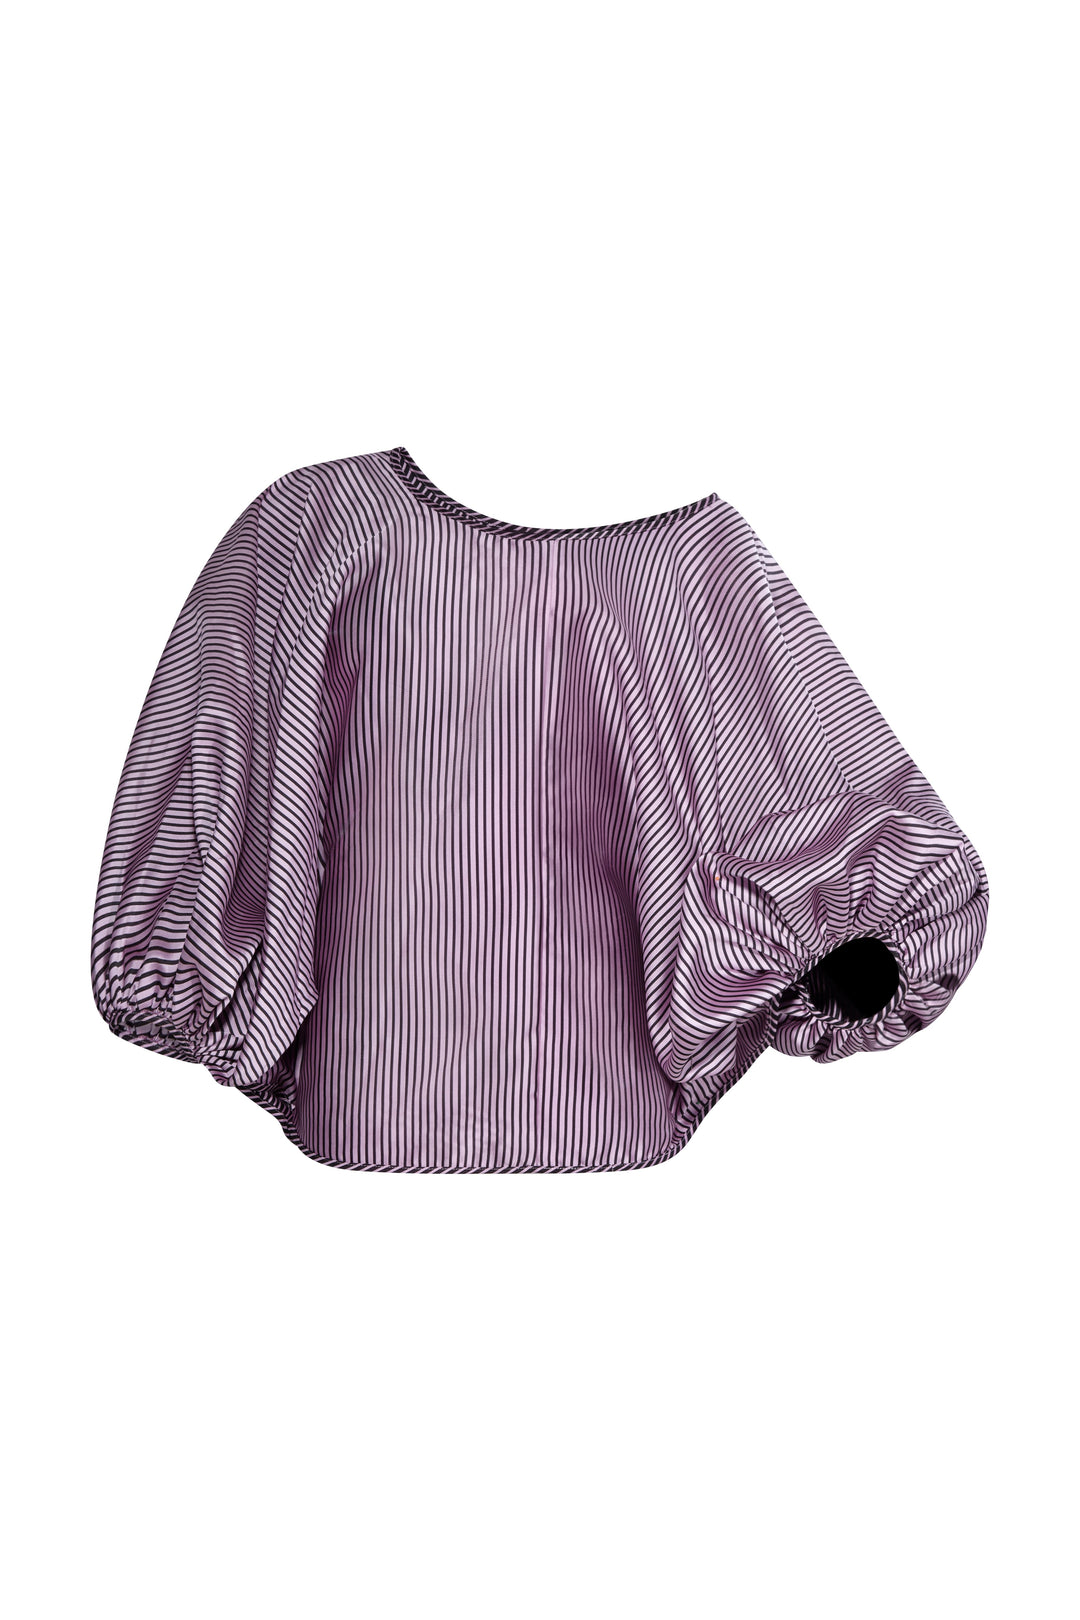 Arianne Elmy Purple and Black Billow Sleeve Party Blouse